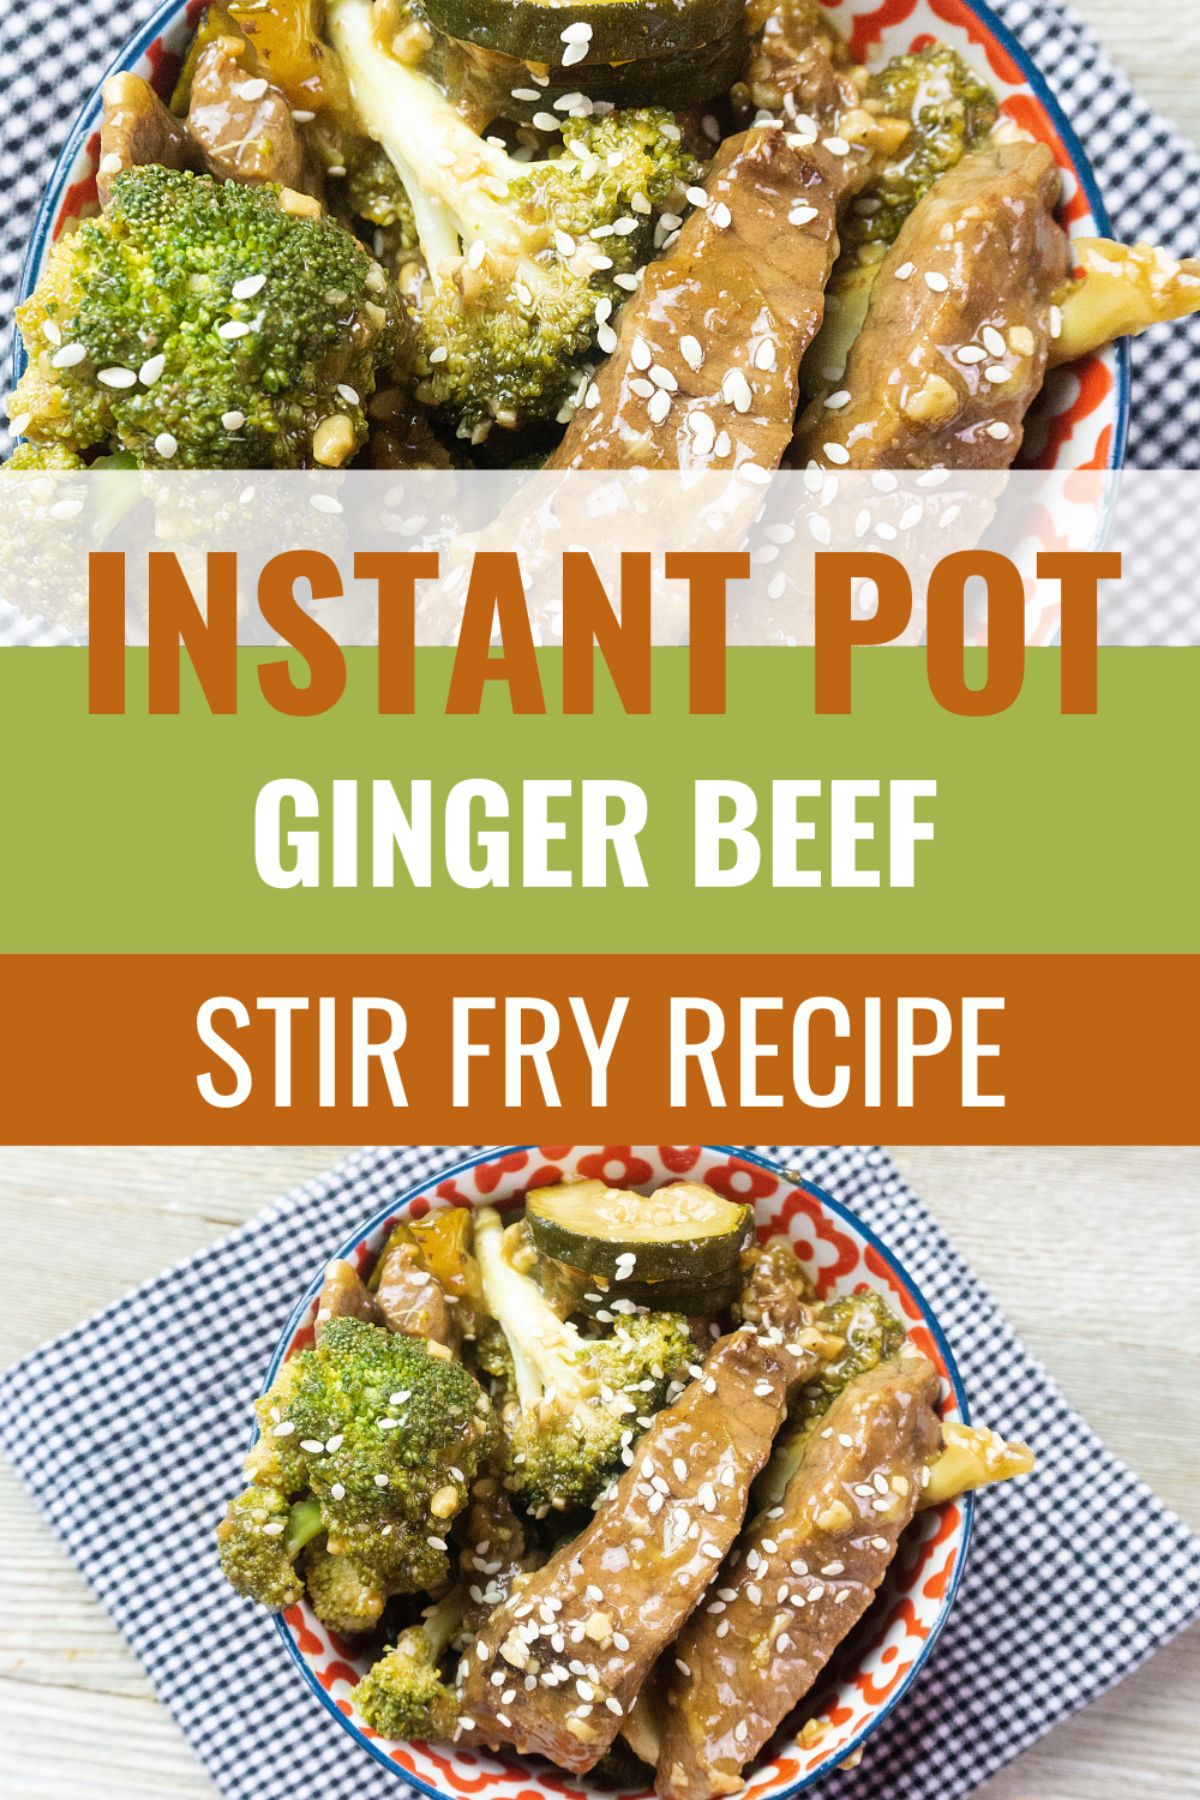 Instant Pot Beef and Broccoli is a delicious beef stir fry recipe that cooks up quickly in the Instant Pot. Your family will love it! #instantpot #pressurecooker #stiryfry #gingerbeef #beefandbroccoli via @wondermomwannab